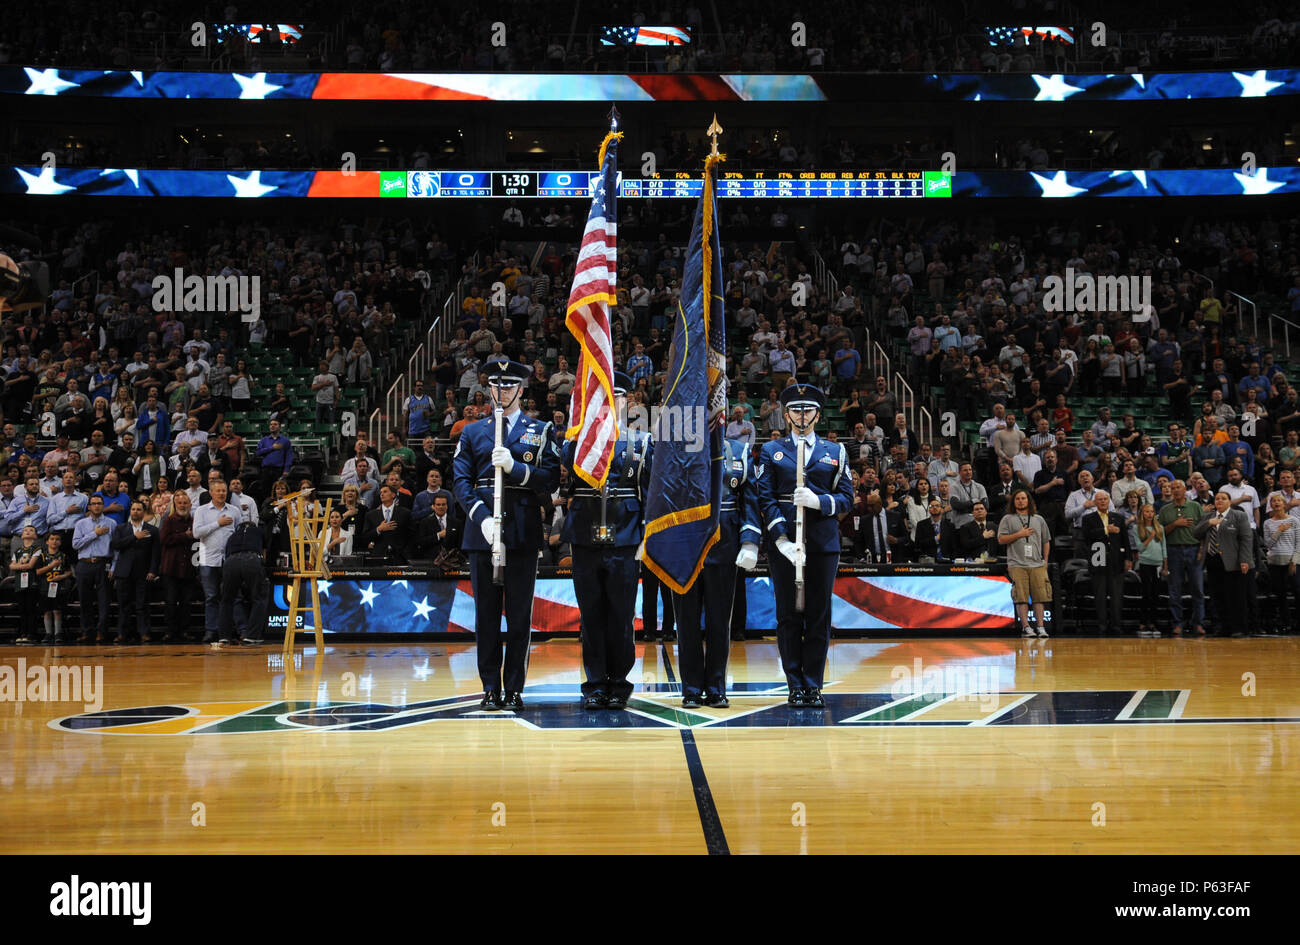 The Utah Air National Guard Honor Guard team presents the colors during the Utah Jazz game April 11, 2016, at the Vivint Smart Home Arena in Salt Lake City. The Honor Guard team has helped kick off 12 home games this season. (U.S. Air National Guard photo by Senior Airman Colton Elliott/Released) Stock Photo